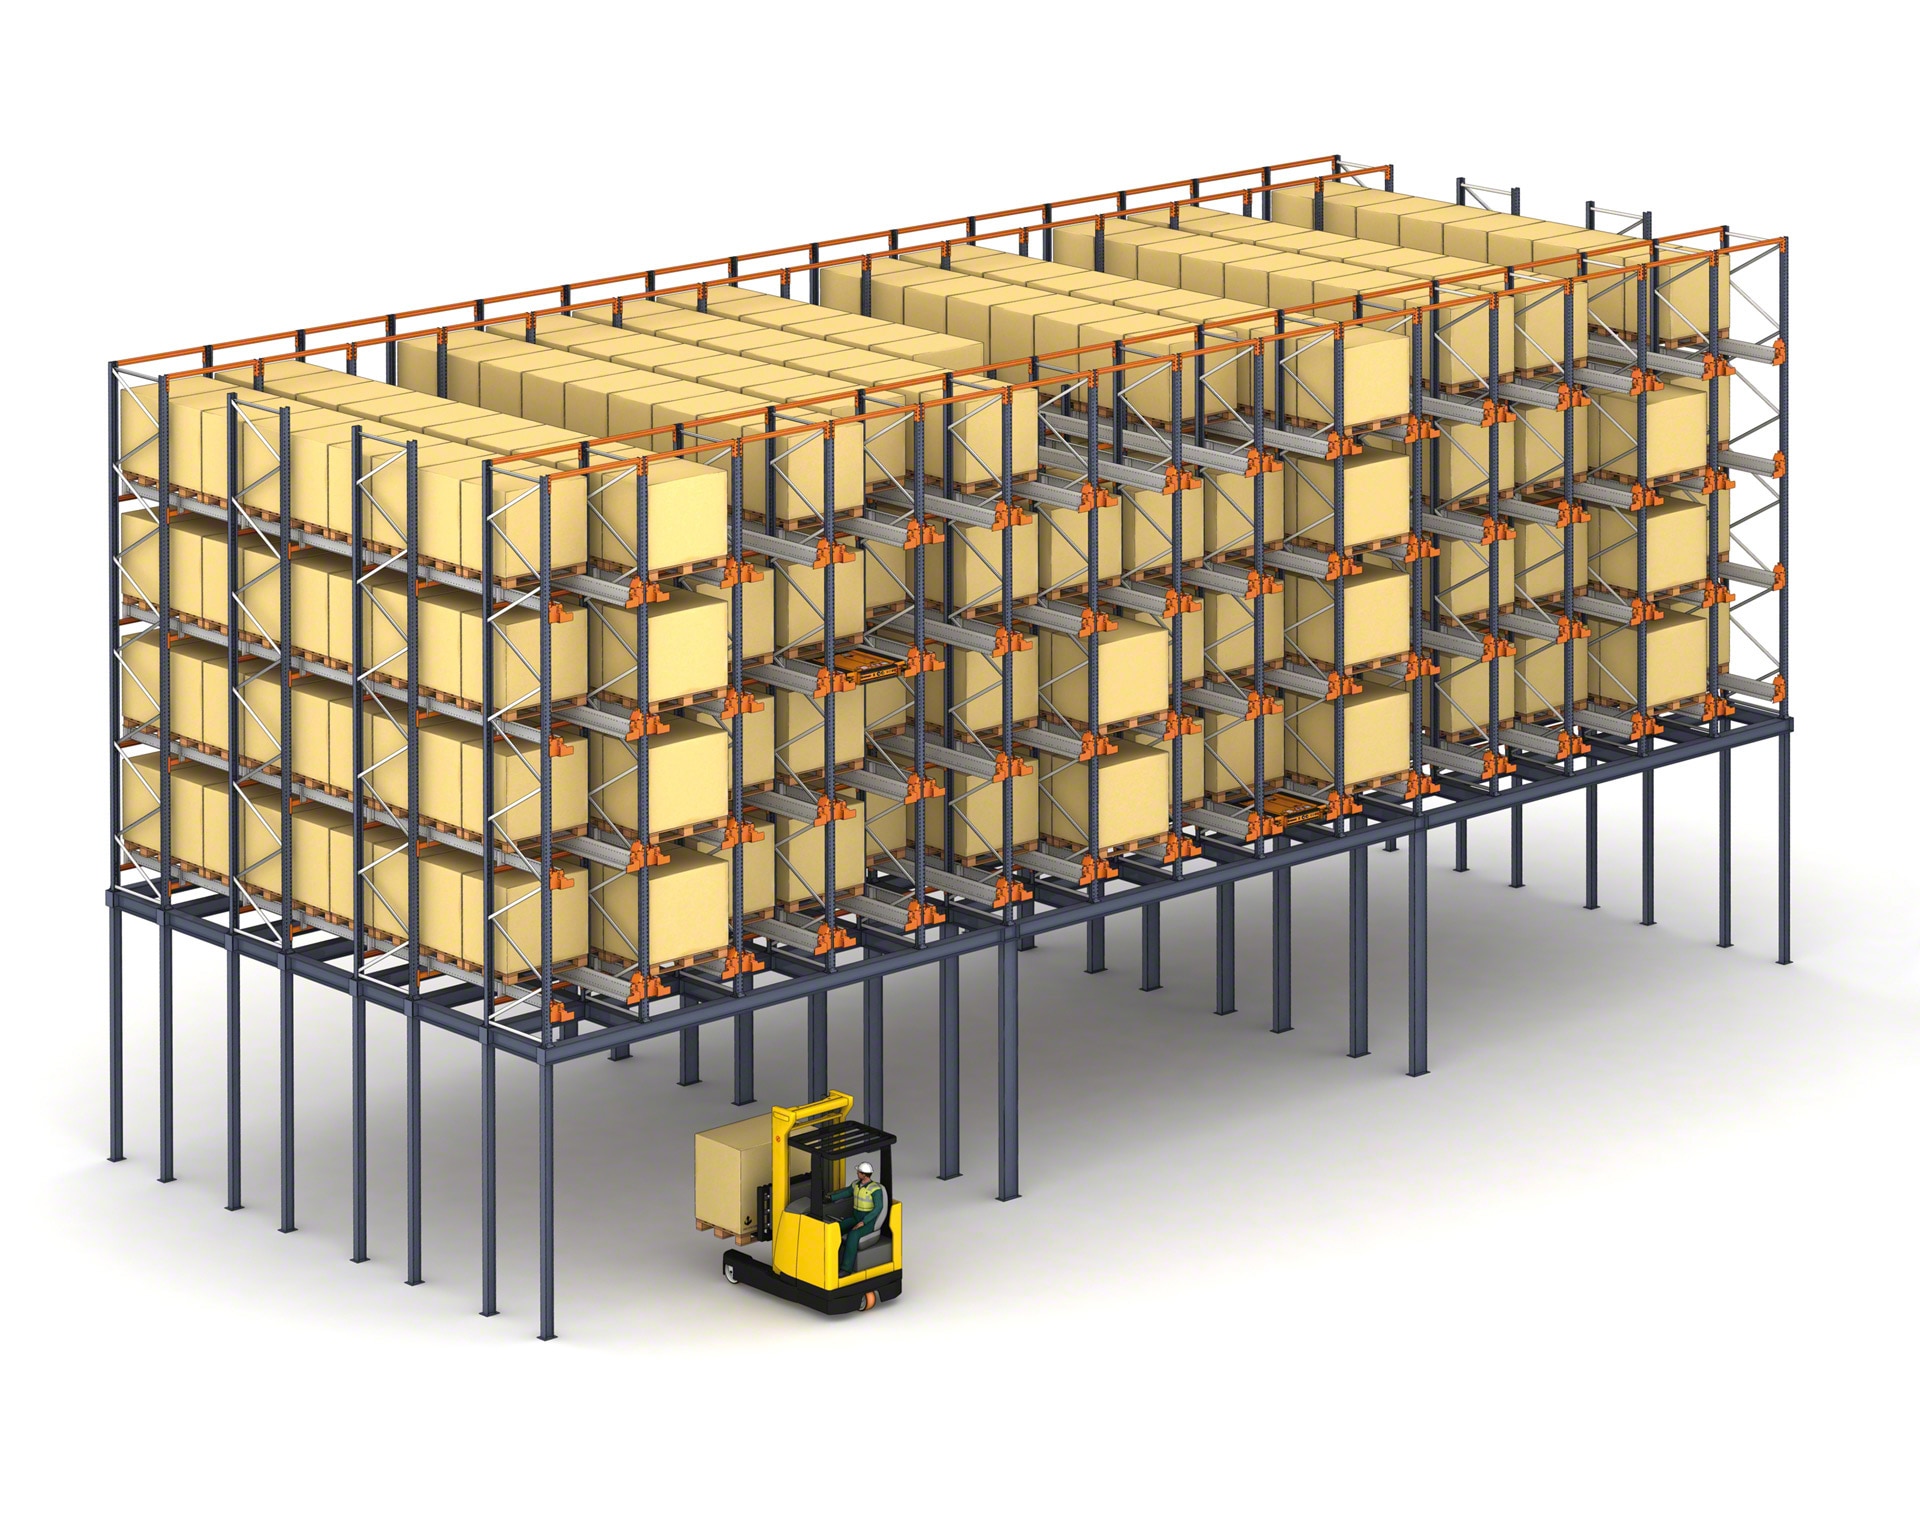 In warehouses with limited space, the Pallet Shuttle system can be installed on a mezzanine floor to maximize the surface